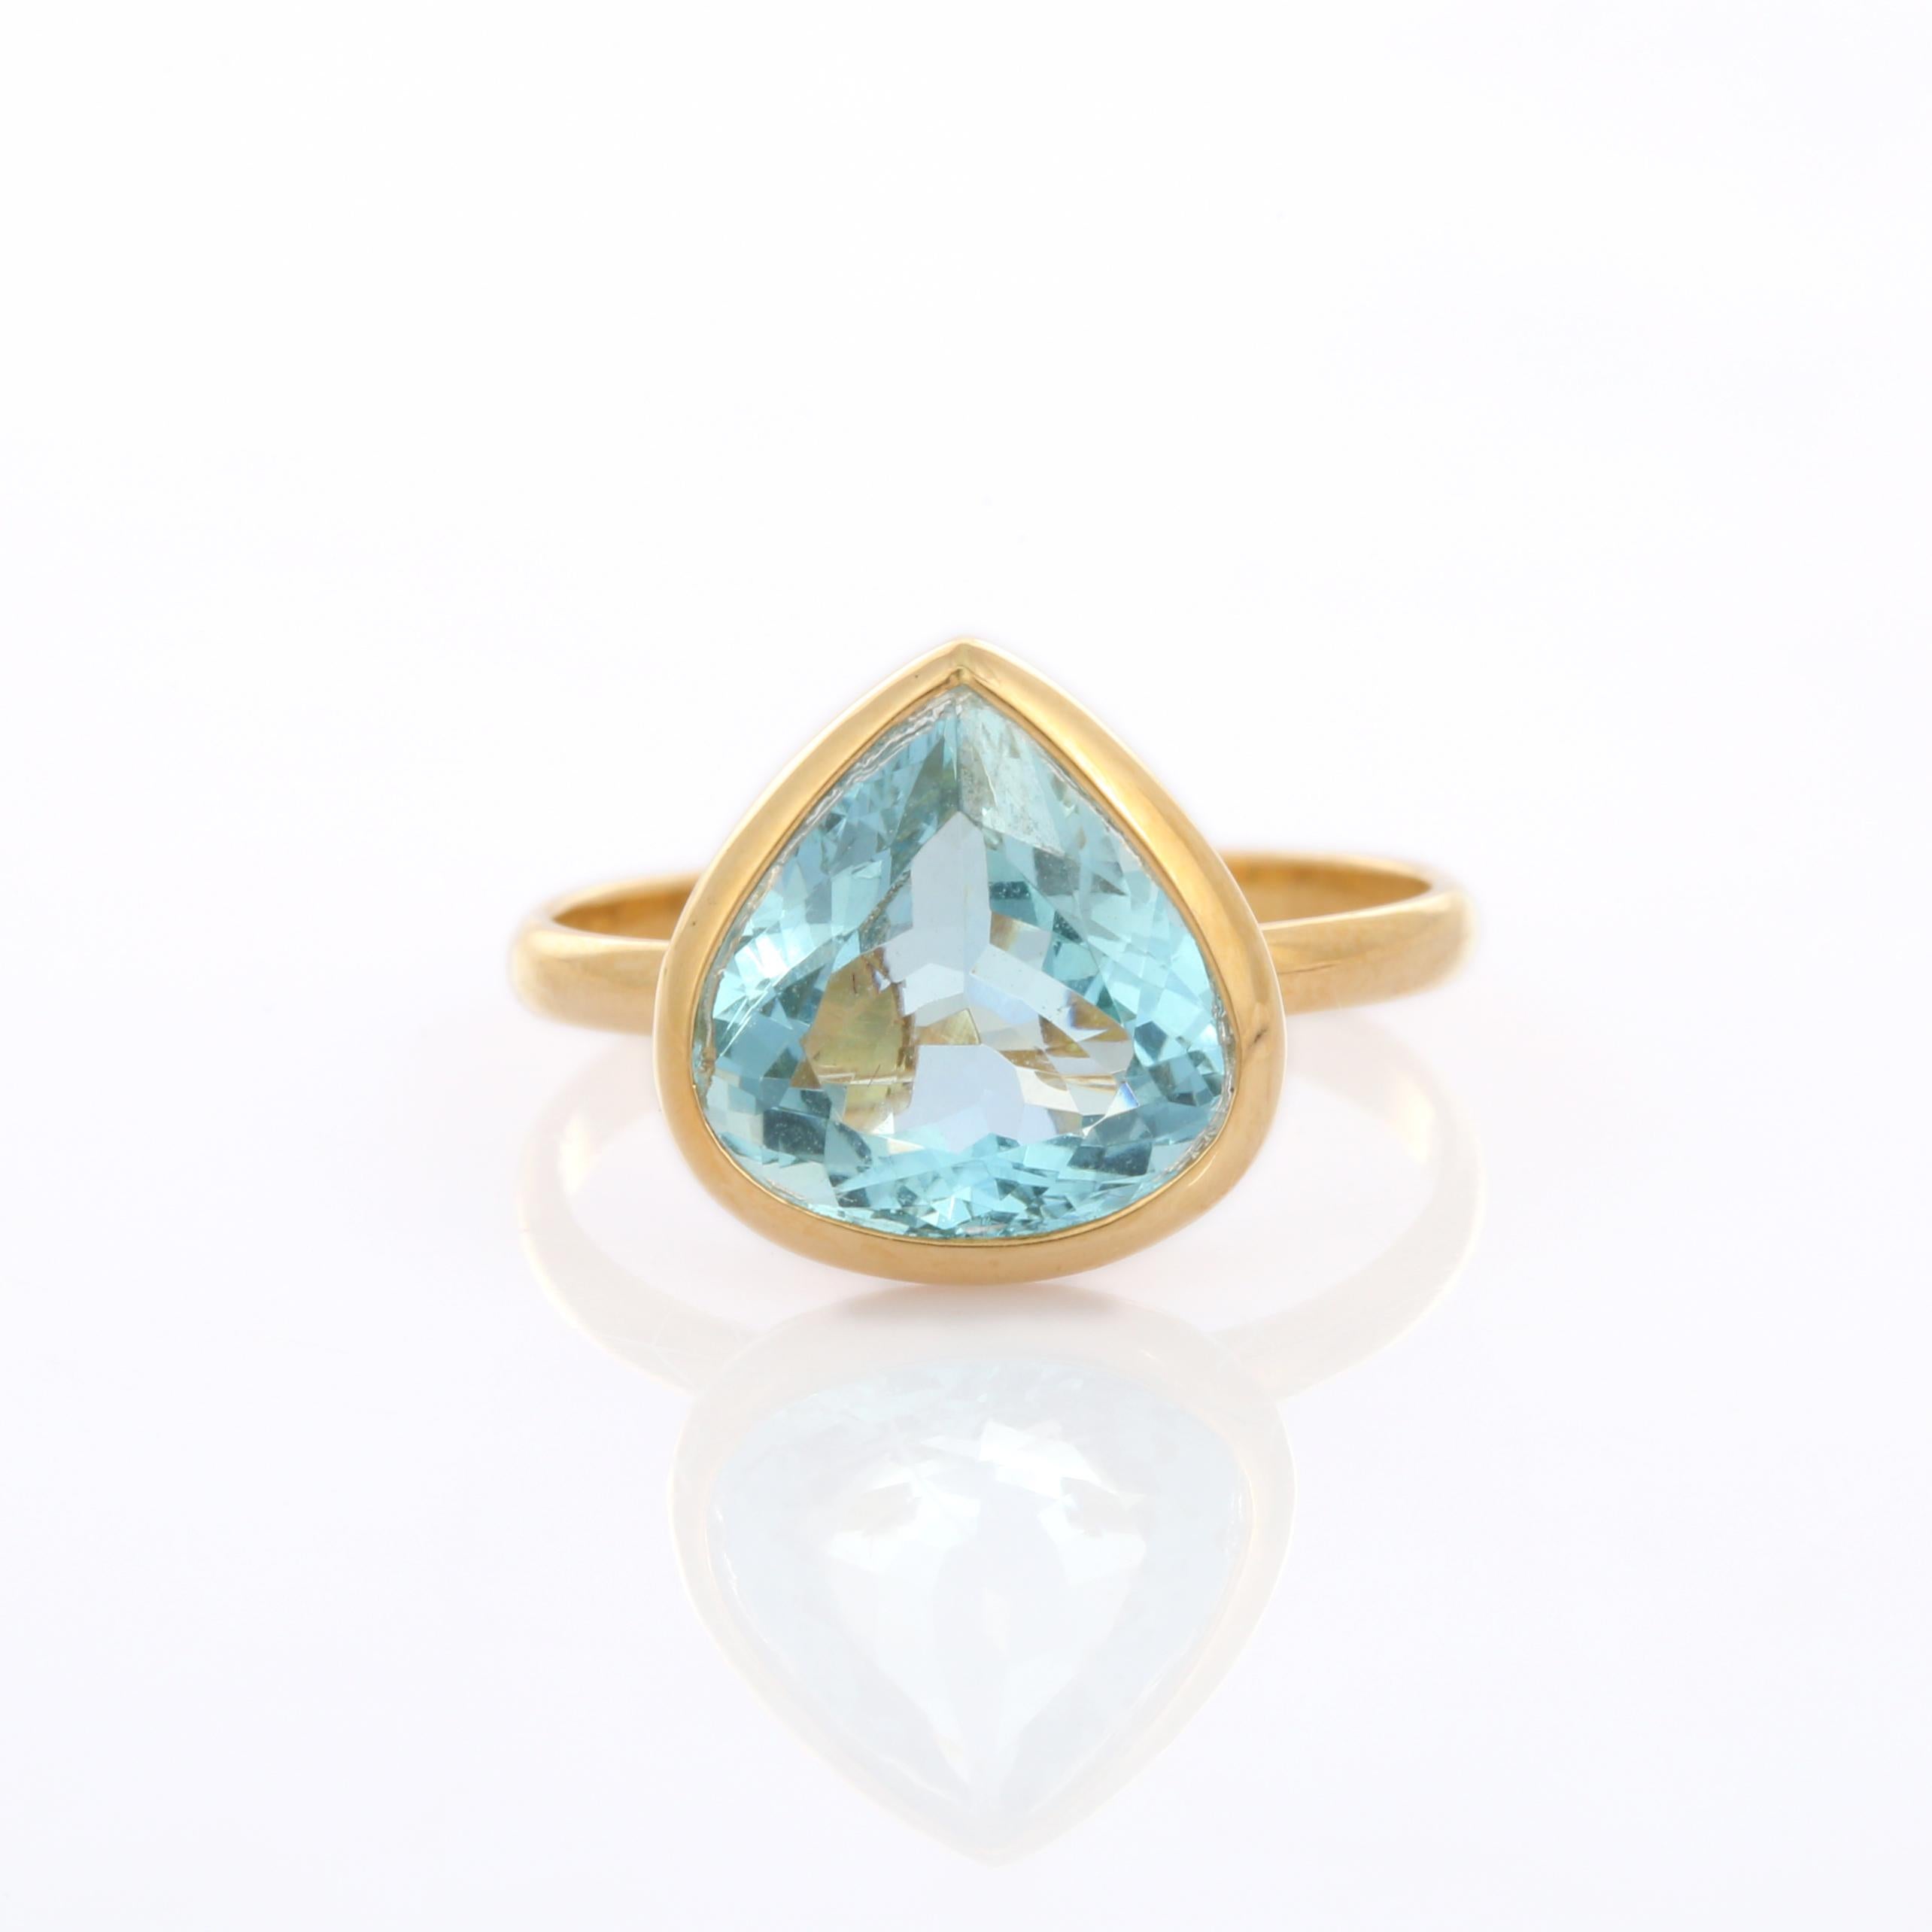 For Sale:  18K Yellow Gold Pear Cut Aquamarine Solitaire Ring 11